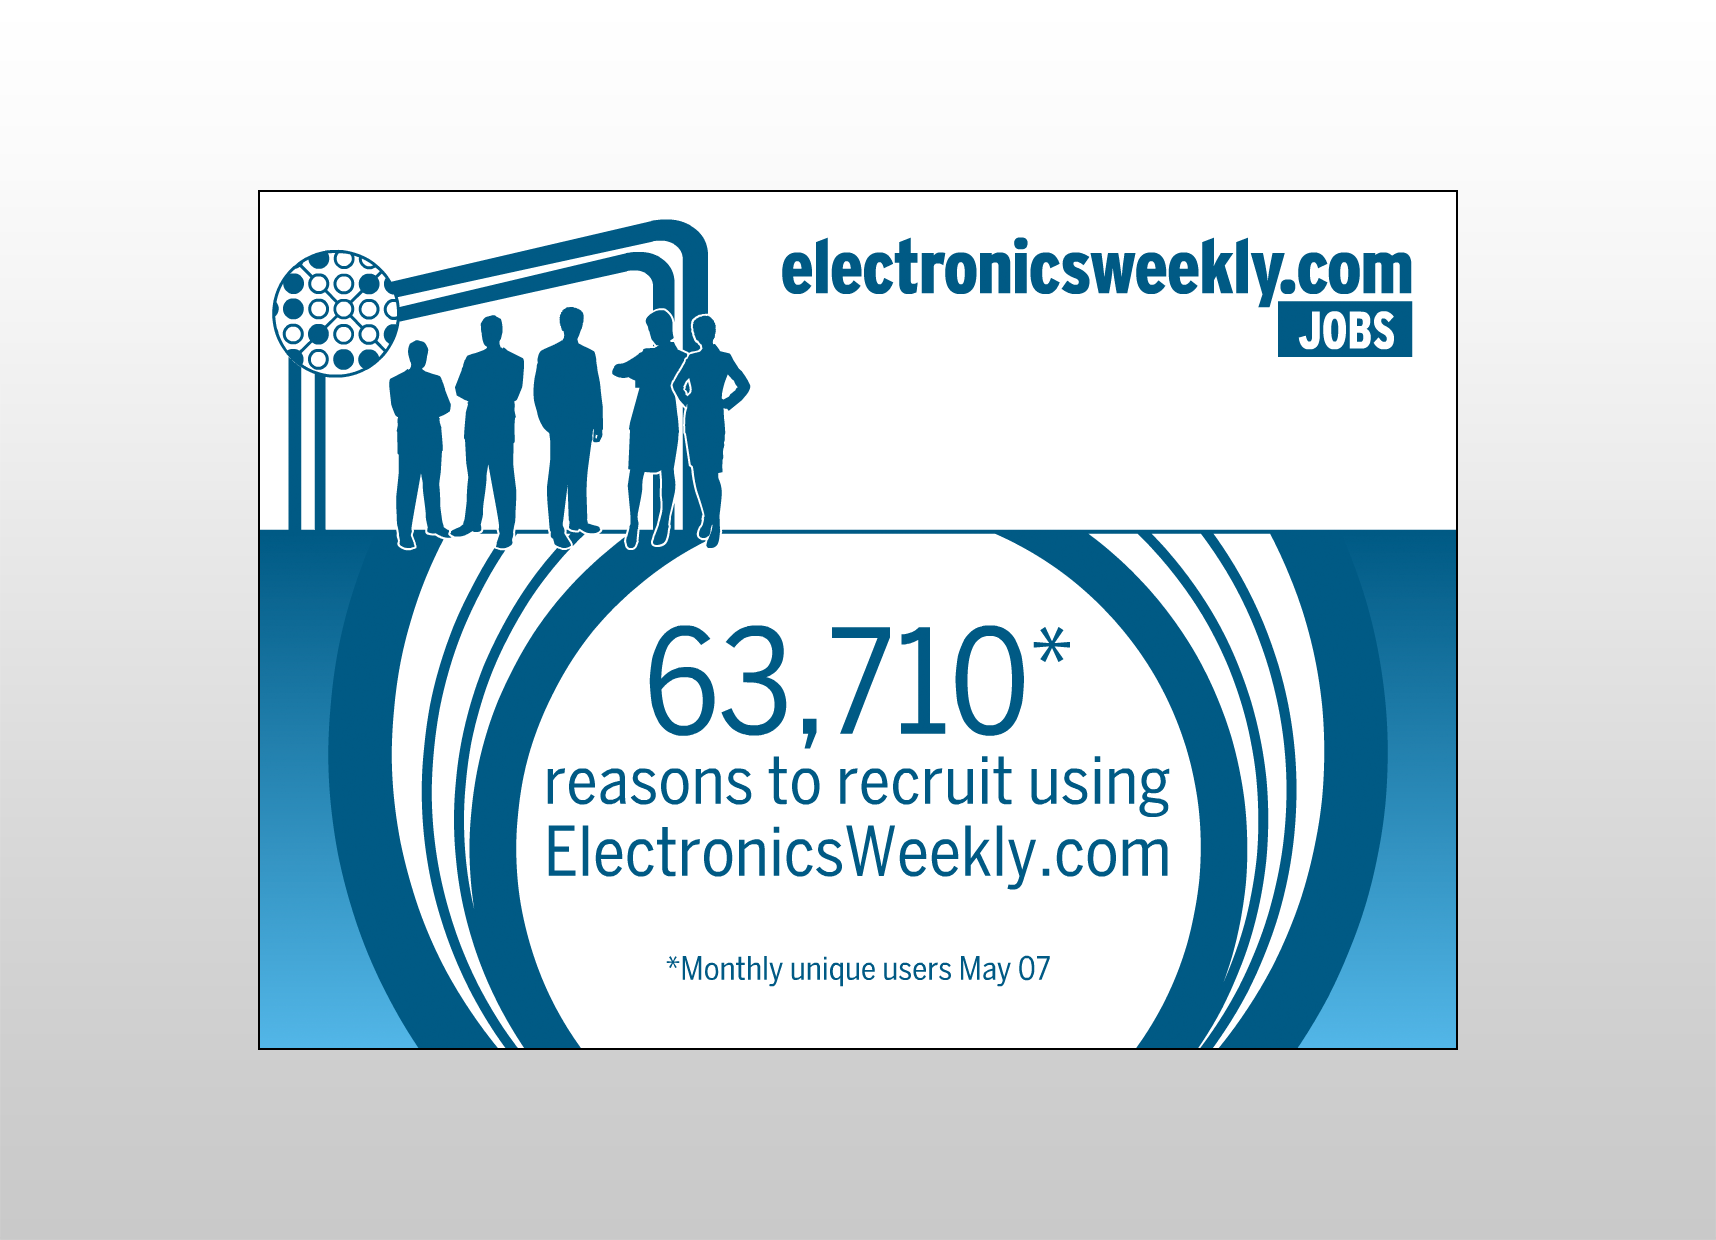 Electronics Weekly Recruitment - What Media Ad